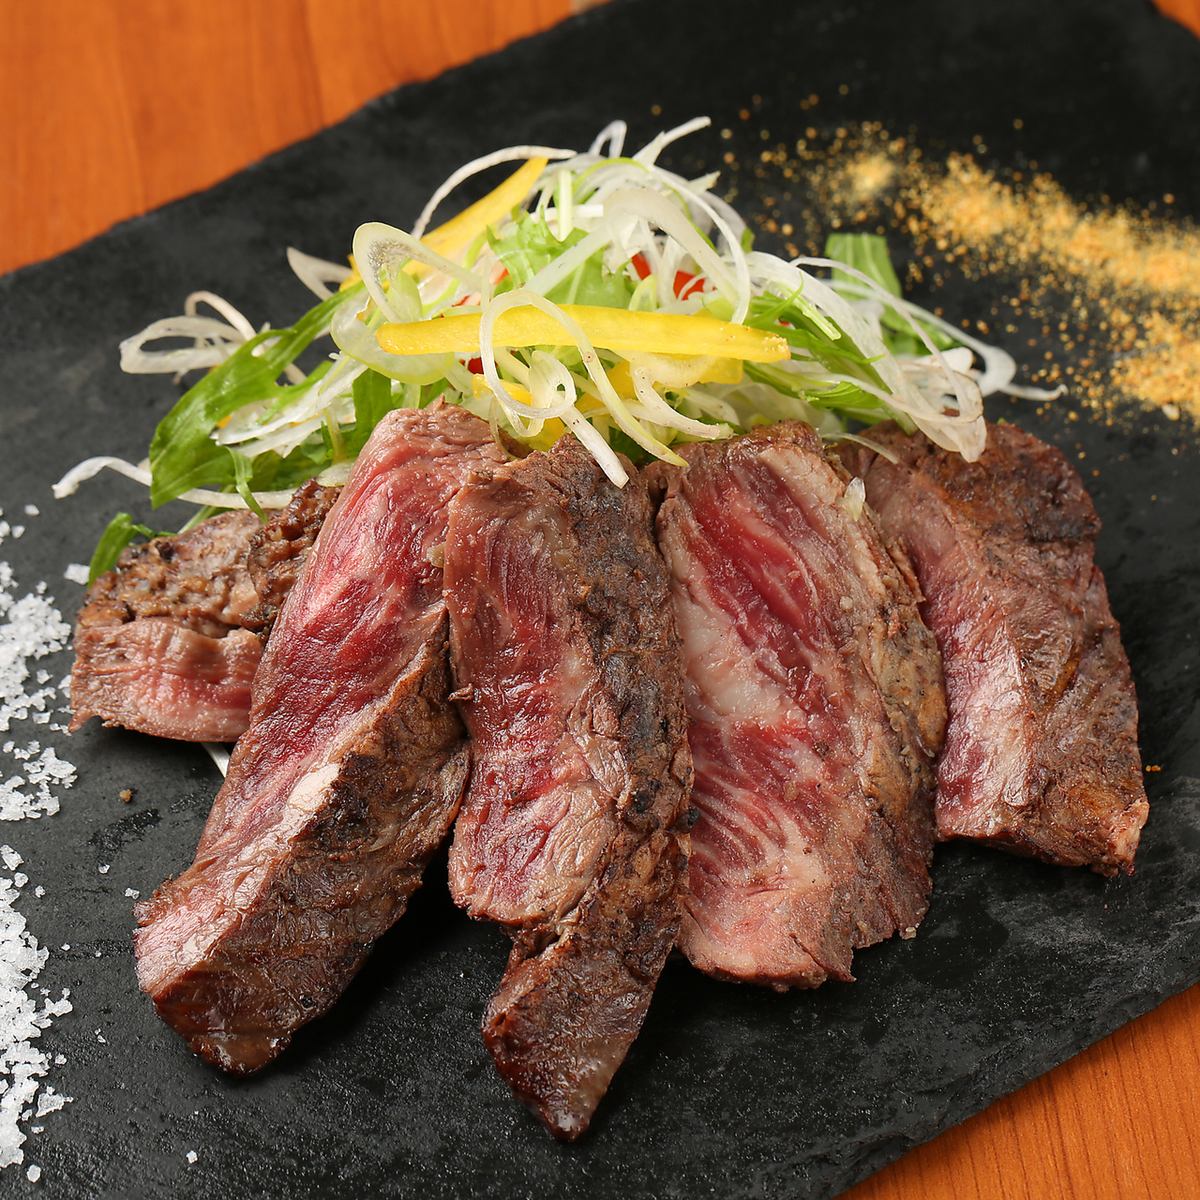 It's grilled all at once with straw! There's plenty of beef sirloin, Kochi first chicken, and more!